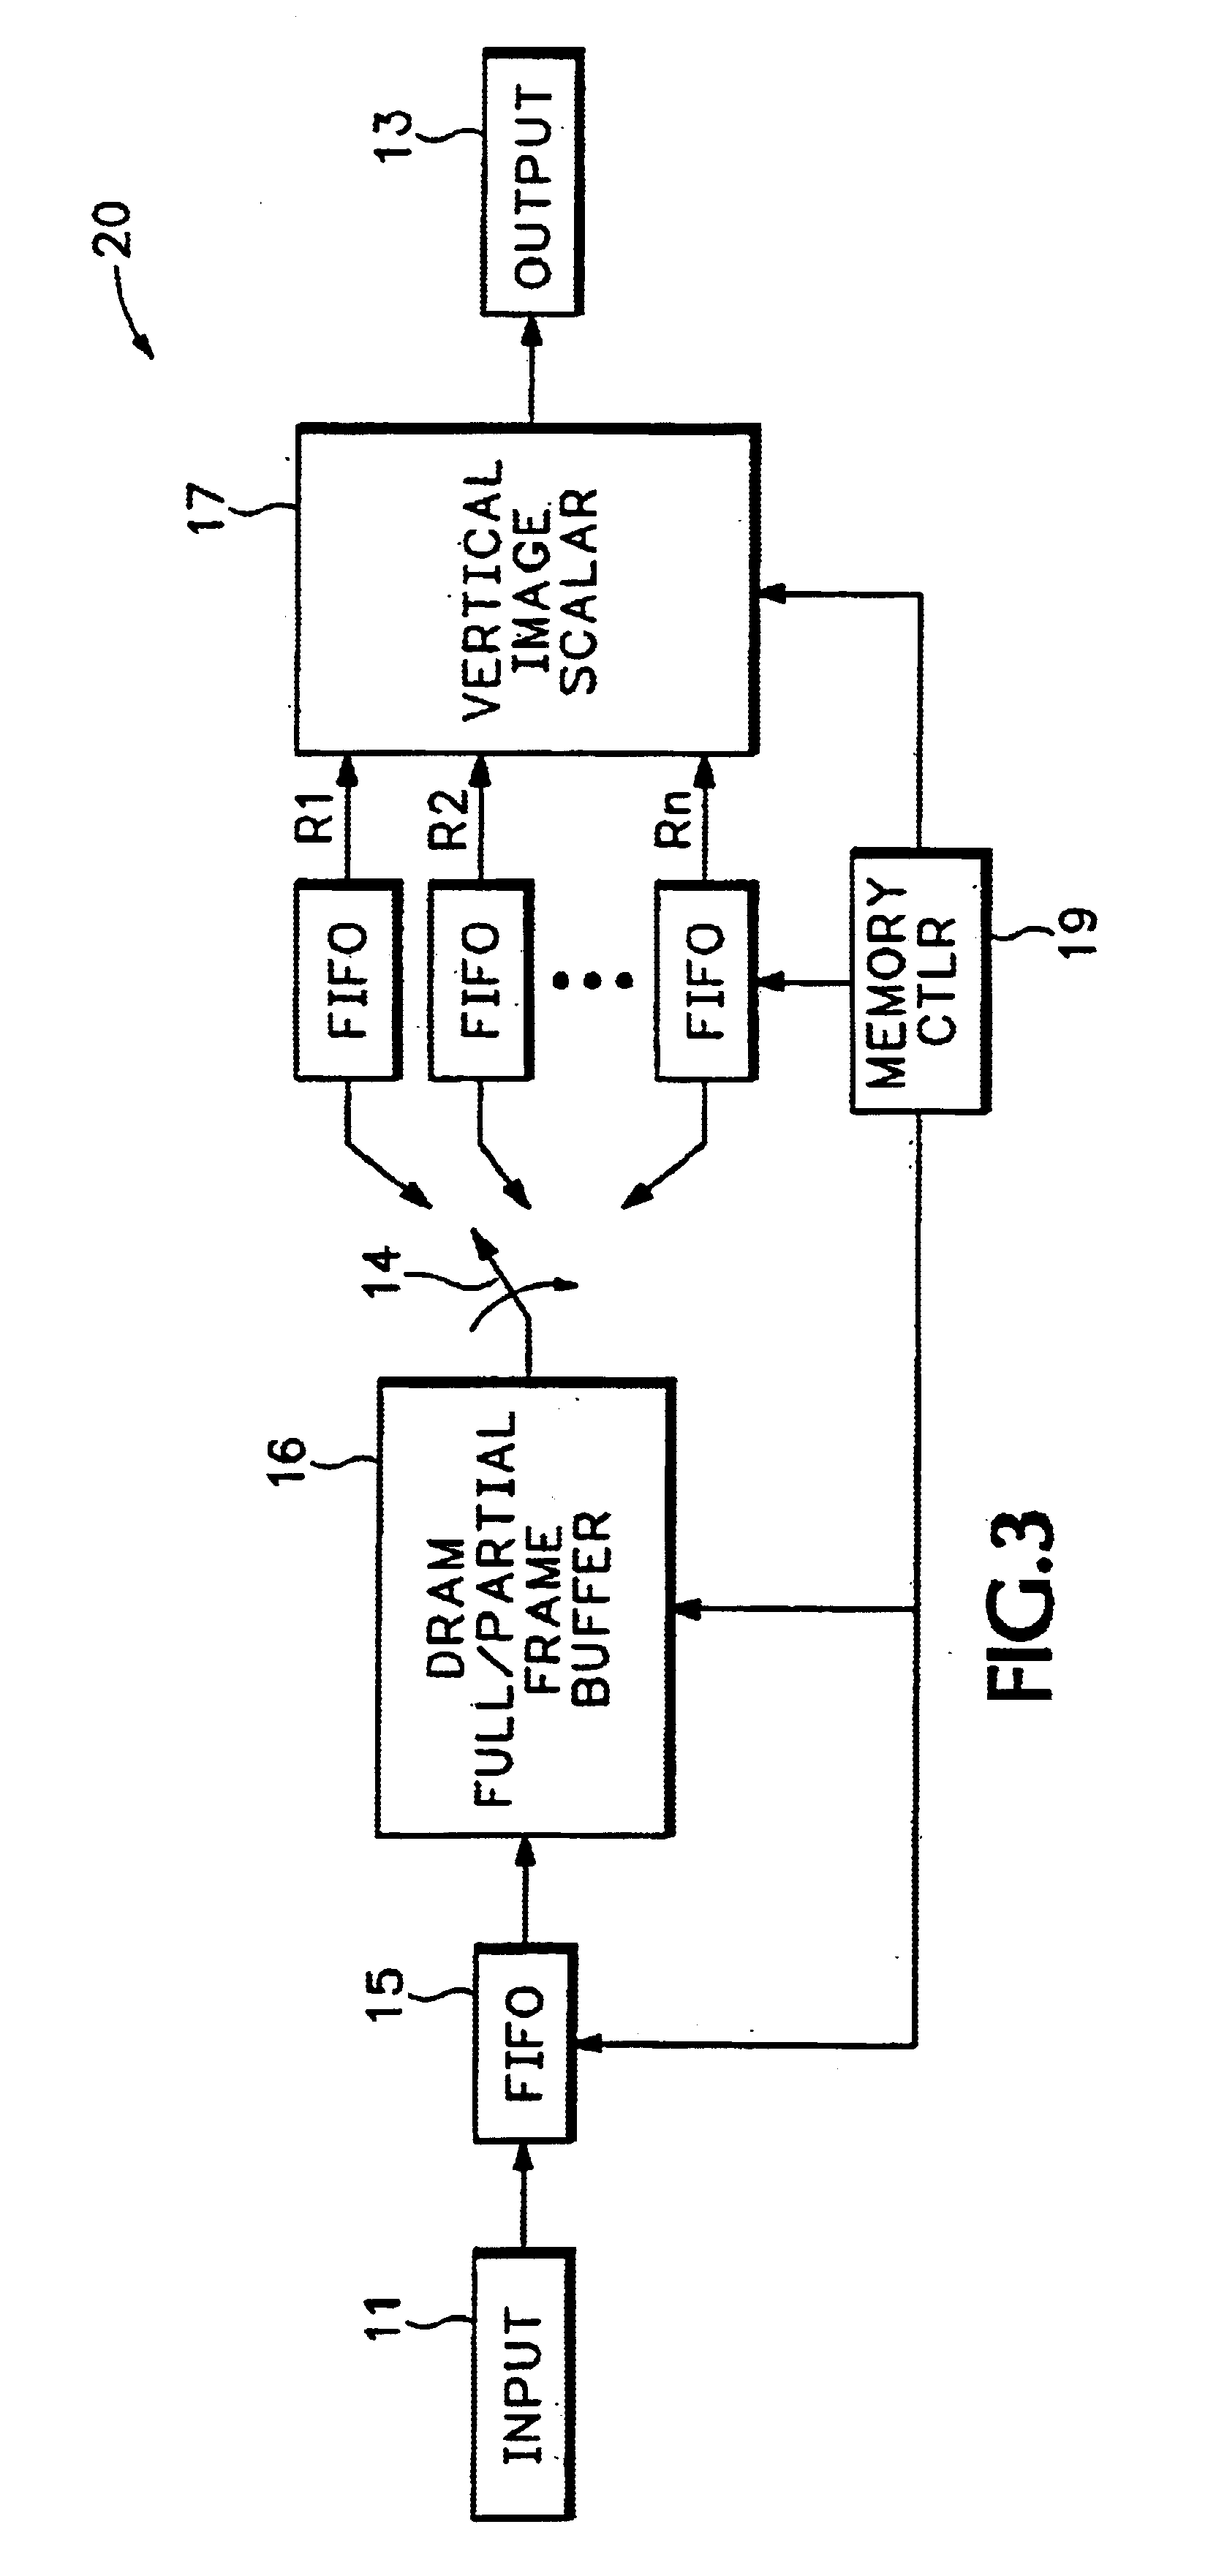 Ultra-high bandwidth multi-port memory system for image scaling applications